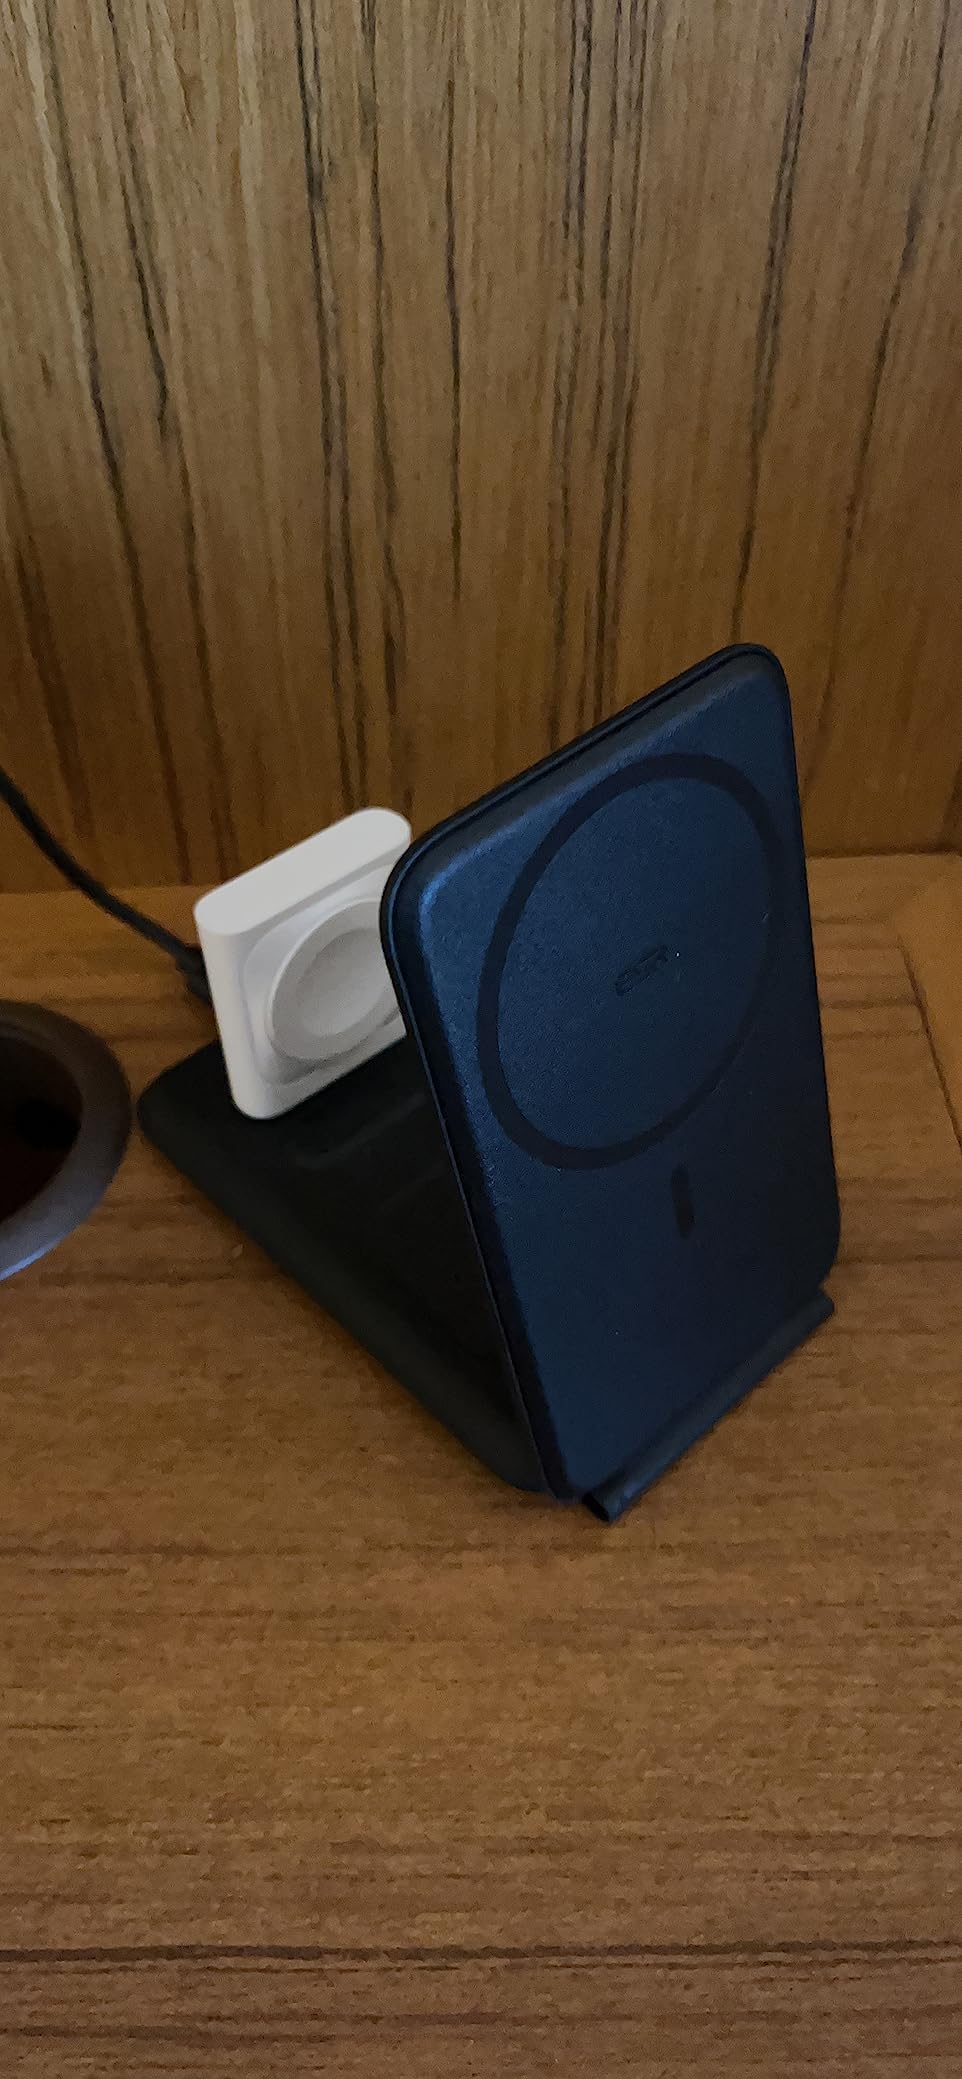 travel charger set